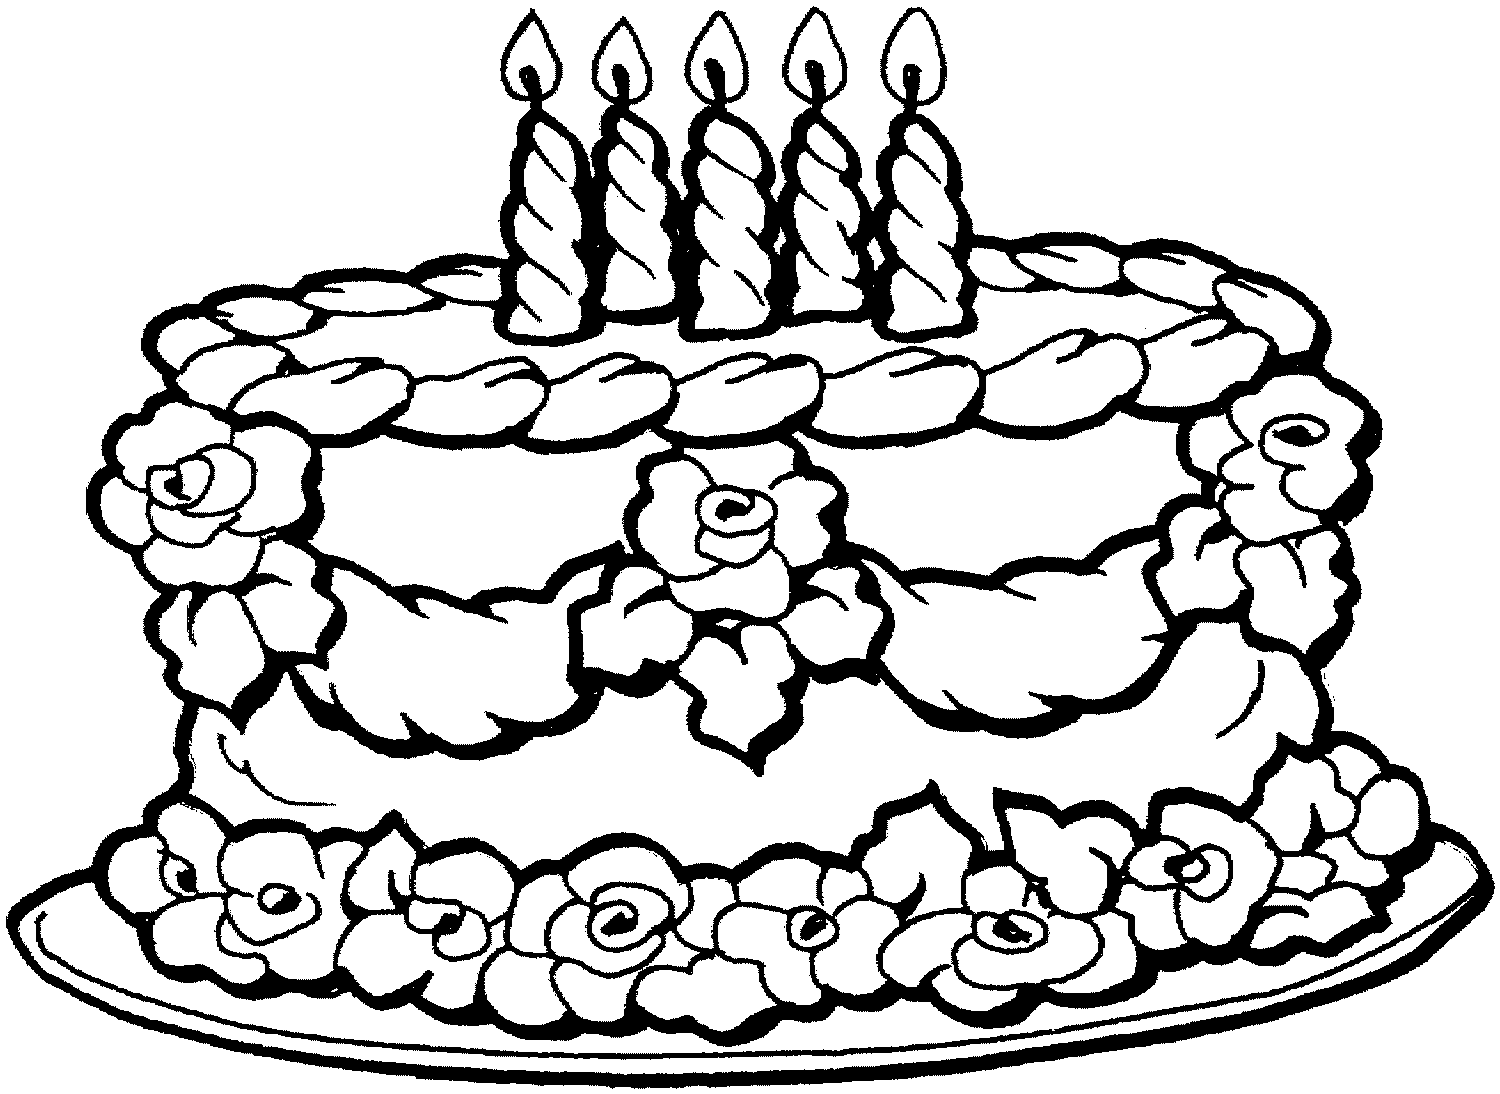 Cake coloring, Download Cake coloring for free 2019